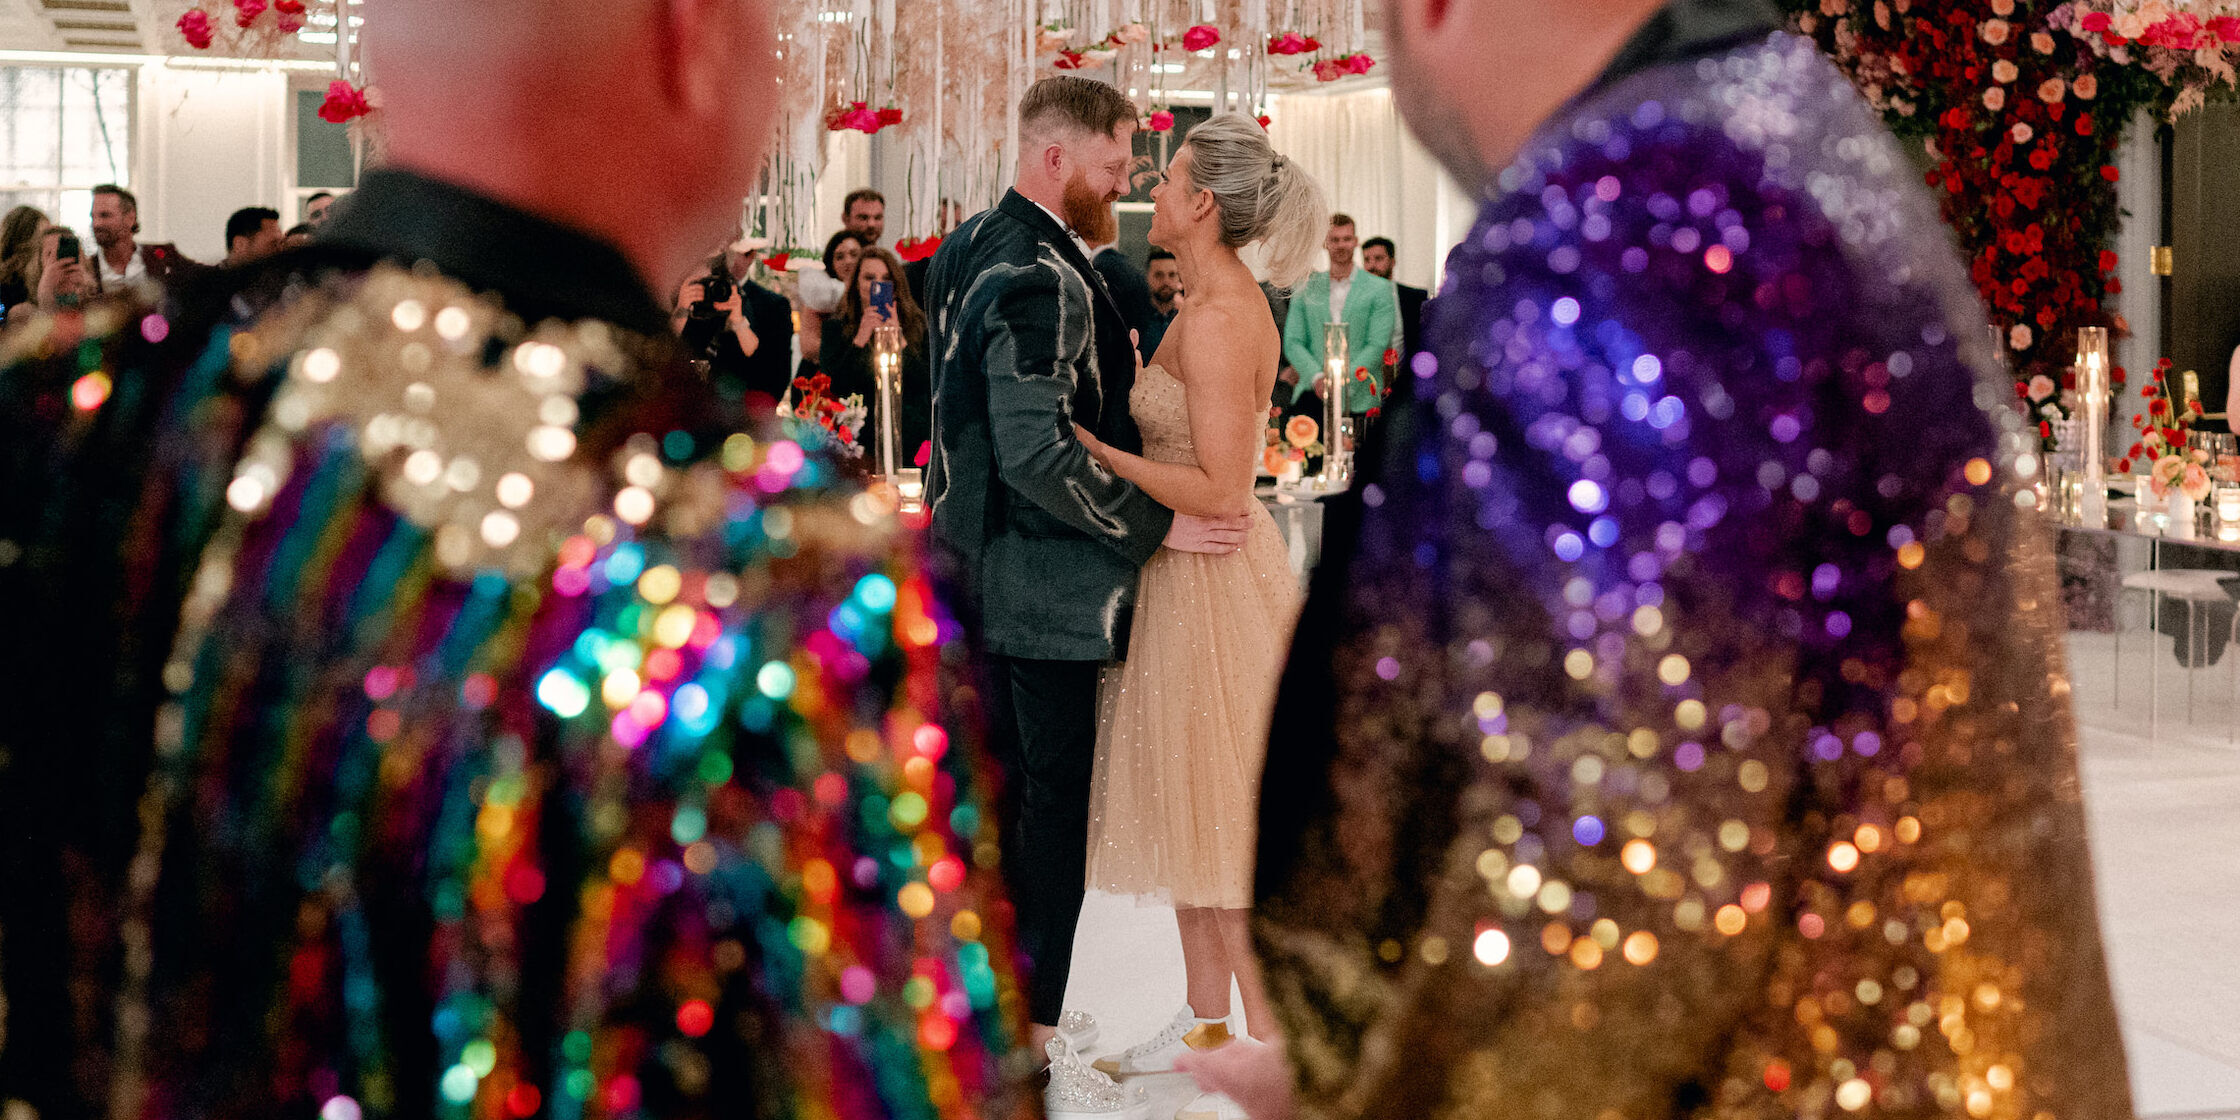 A pair of newlyweds share their first dance following their surprise wedding.